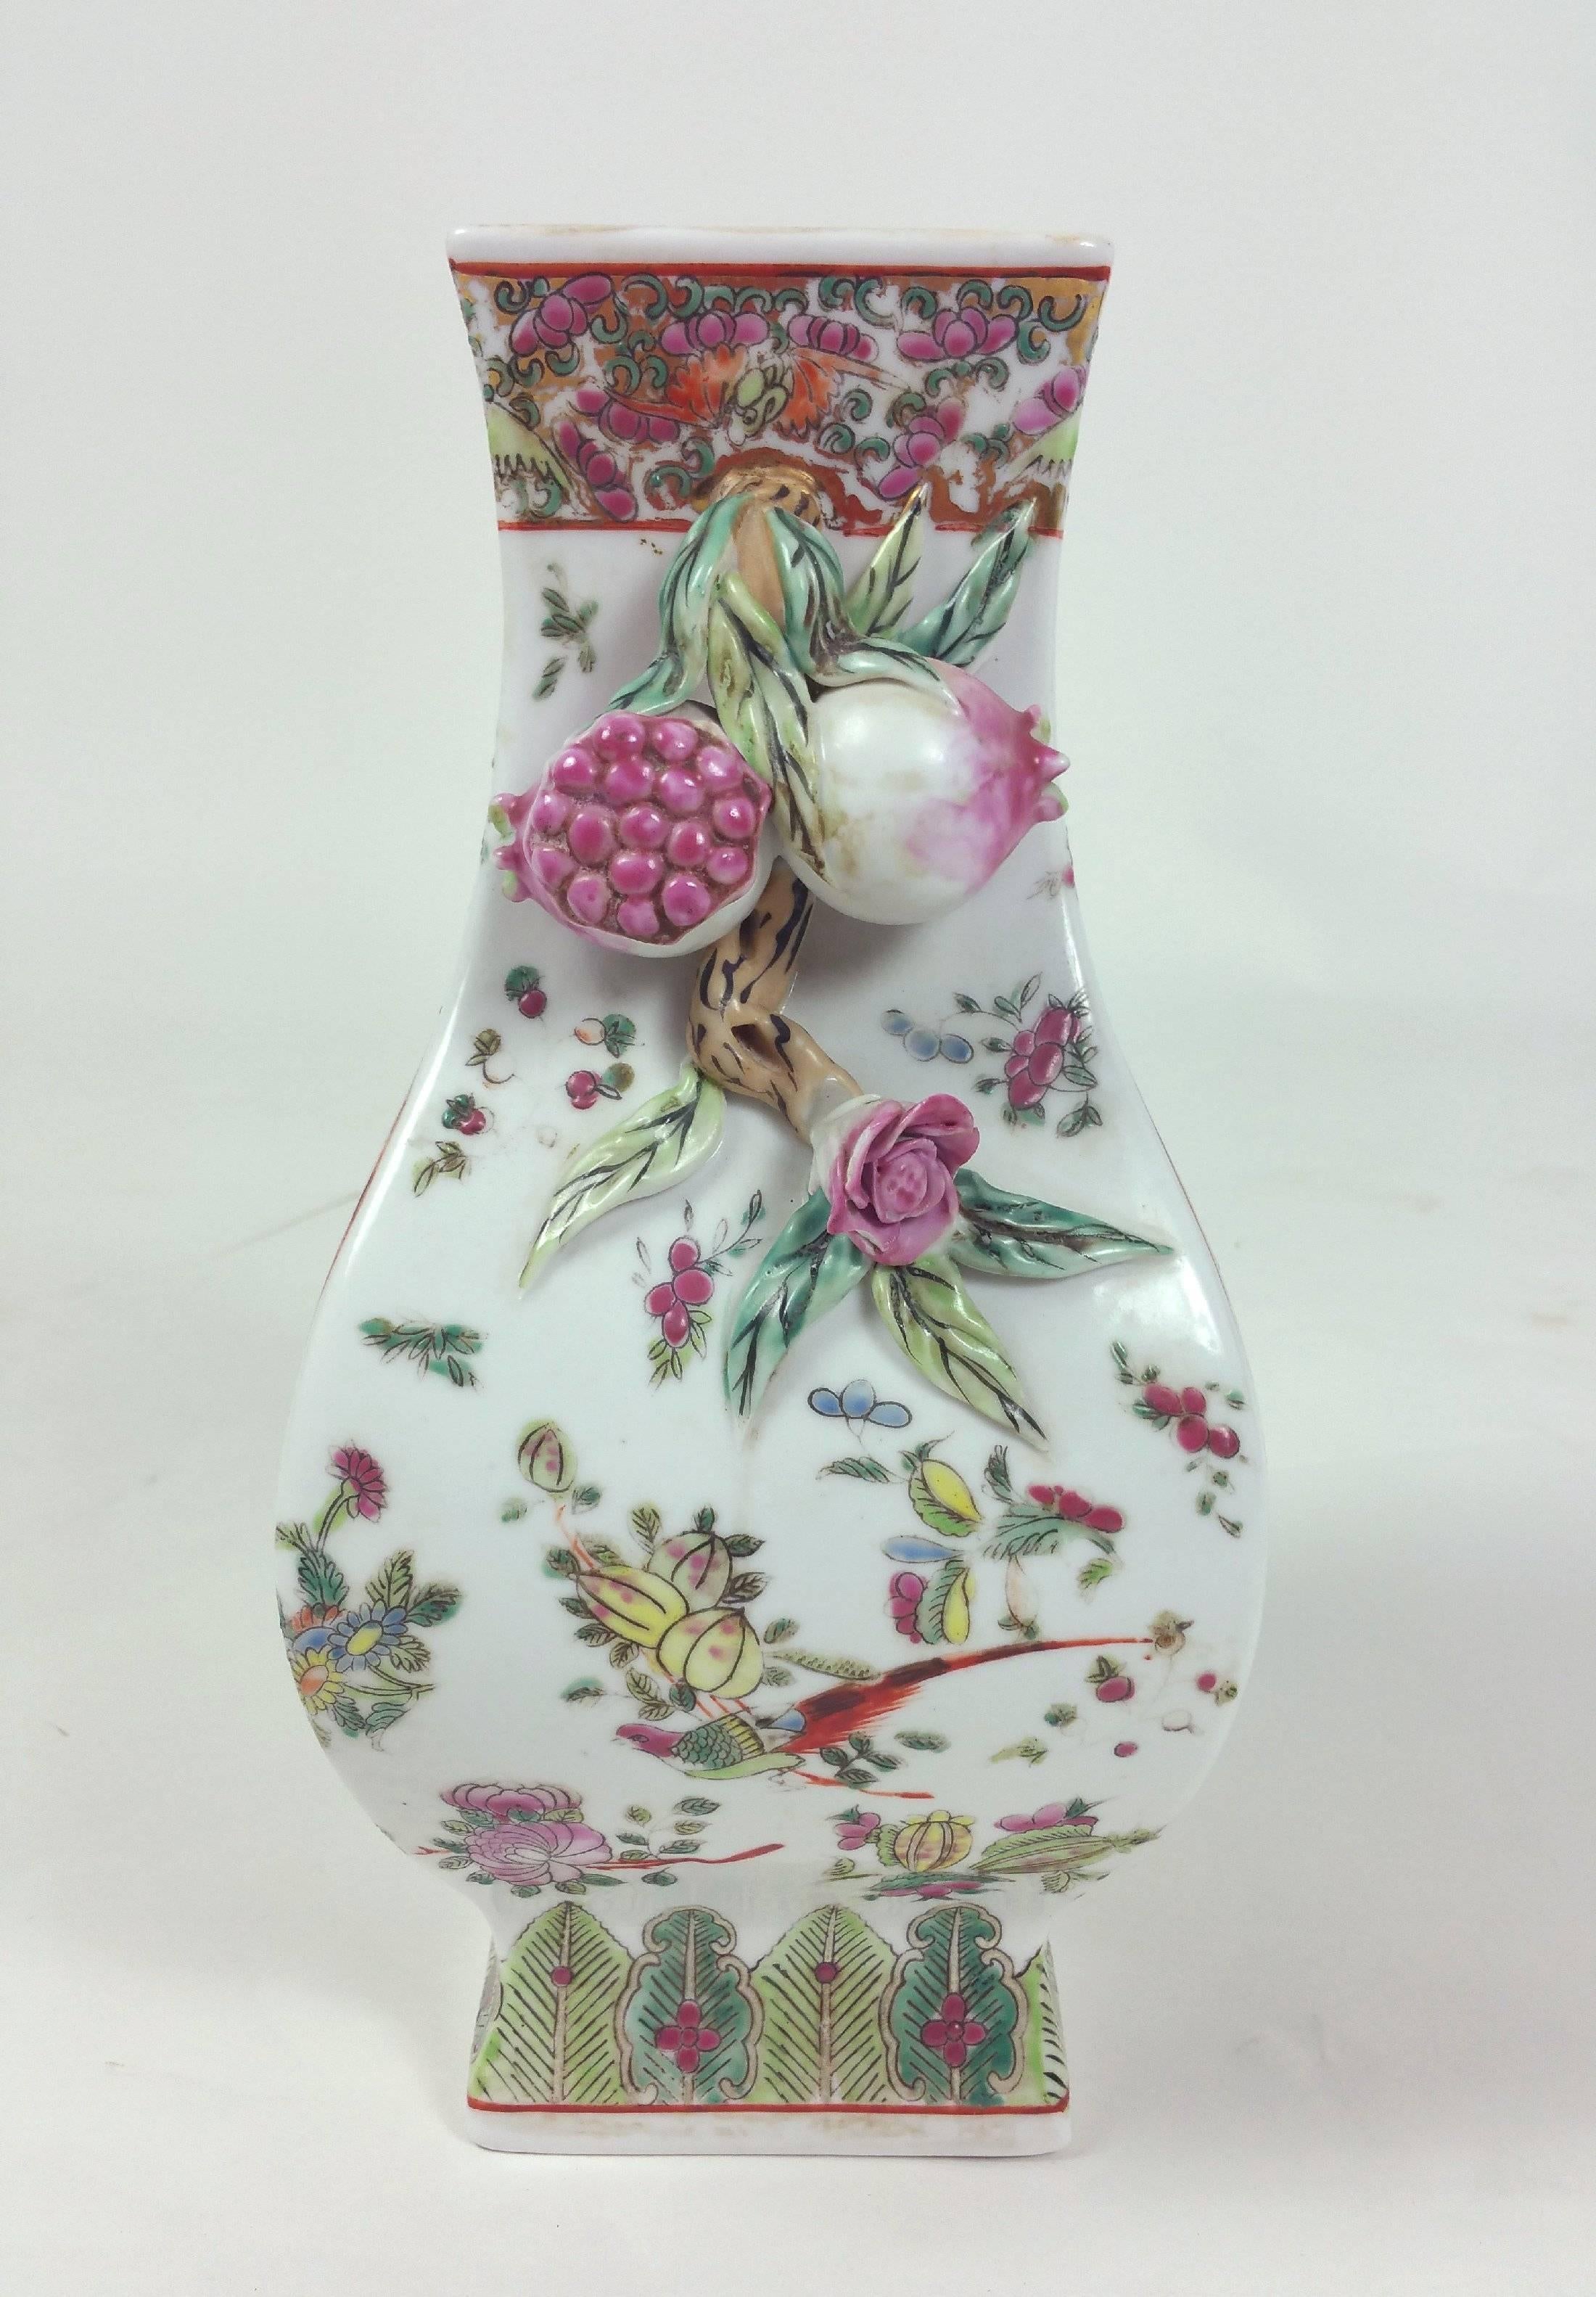 This beautiful and ornately designed early 20th century Chinese shaped vase features twin handles with lovely detailed relief work of fruit and foliage. The hand-painted detailed design features exotic birds with flowering trees and a seal mark to